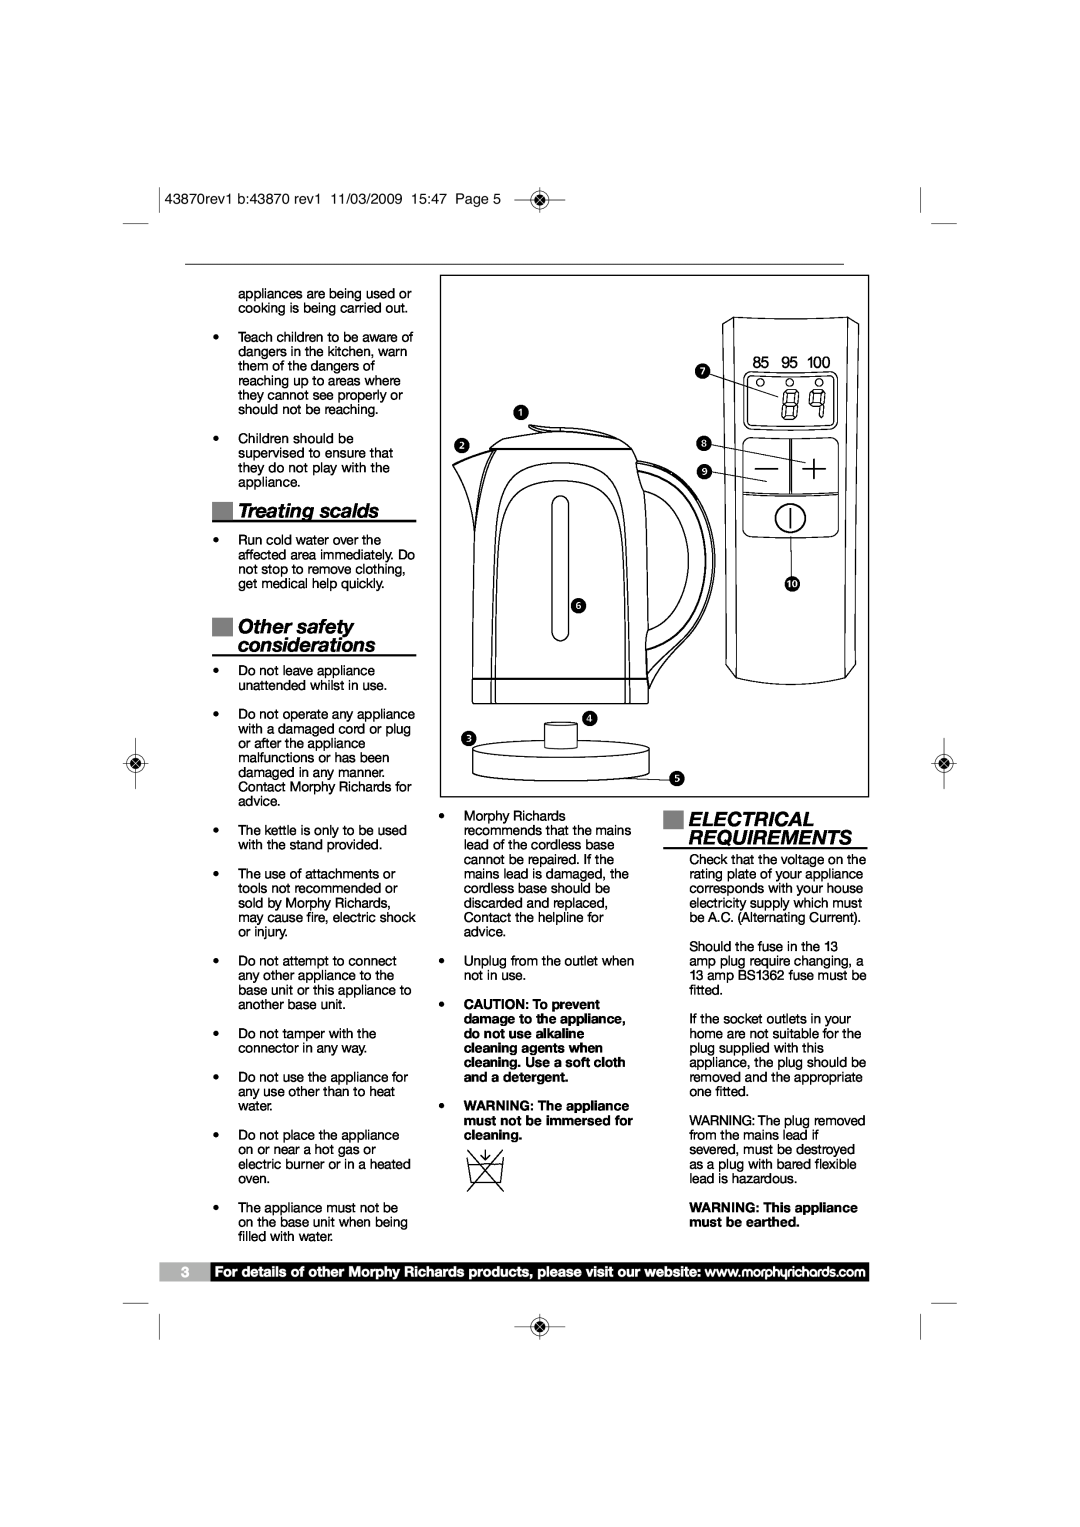 Morphy Richards KT43870 manual Treating scalds, Other safety considerations, Electrical Requirements 